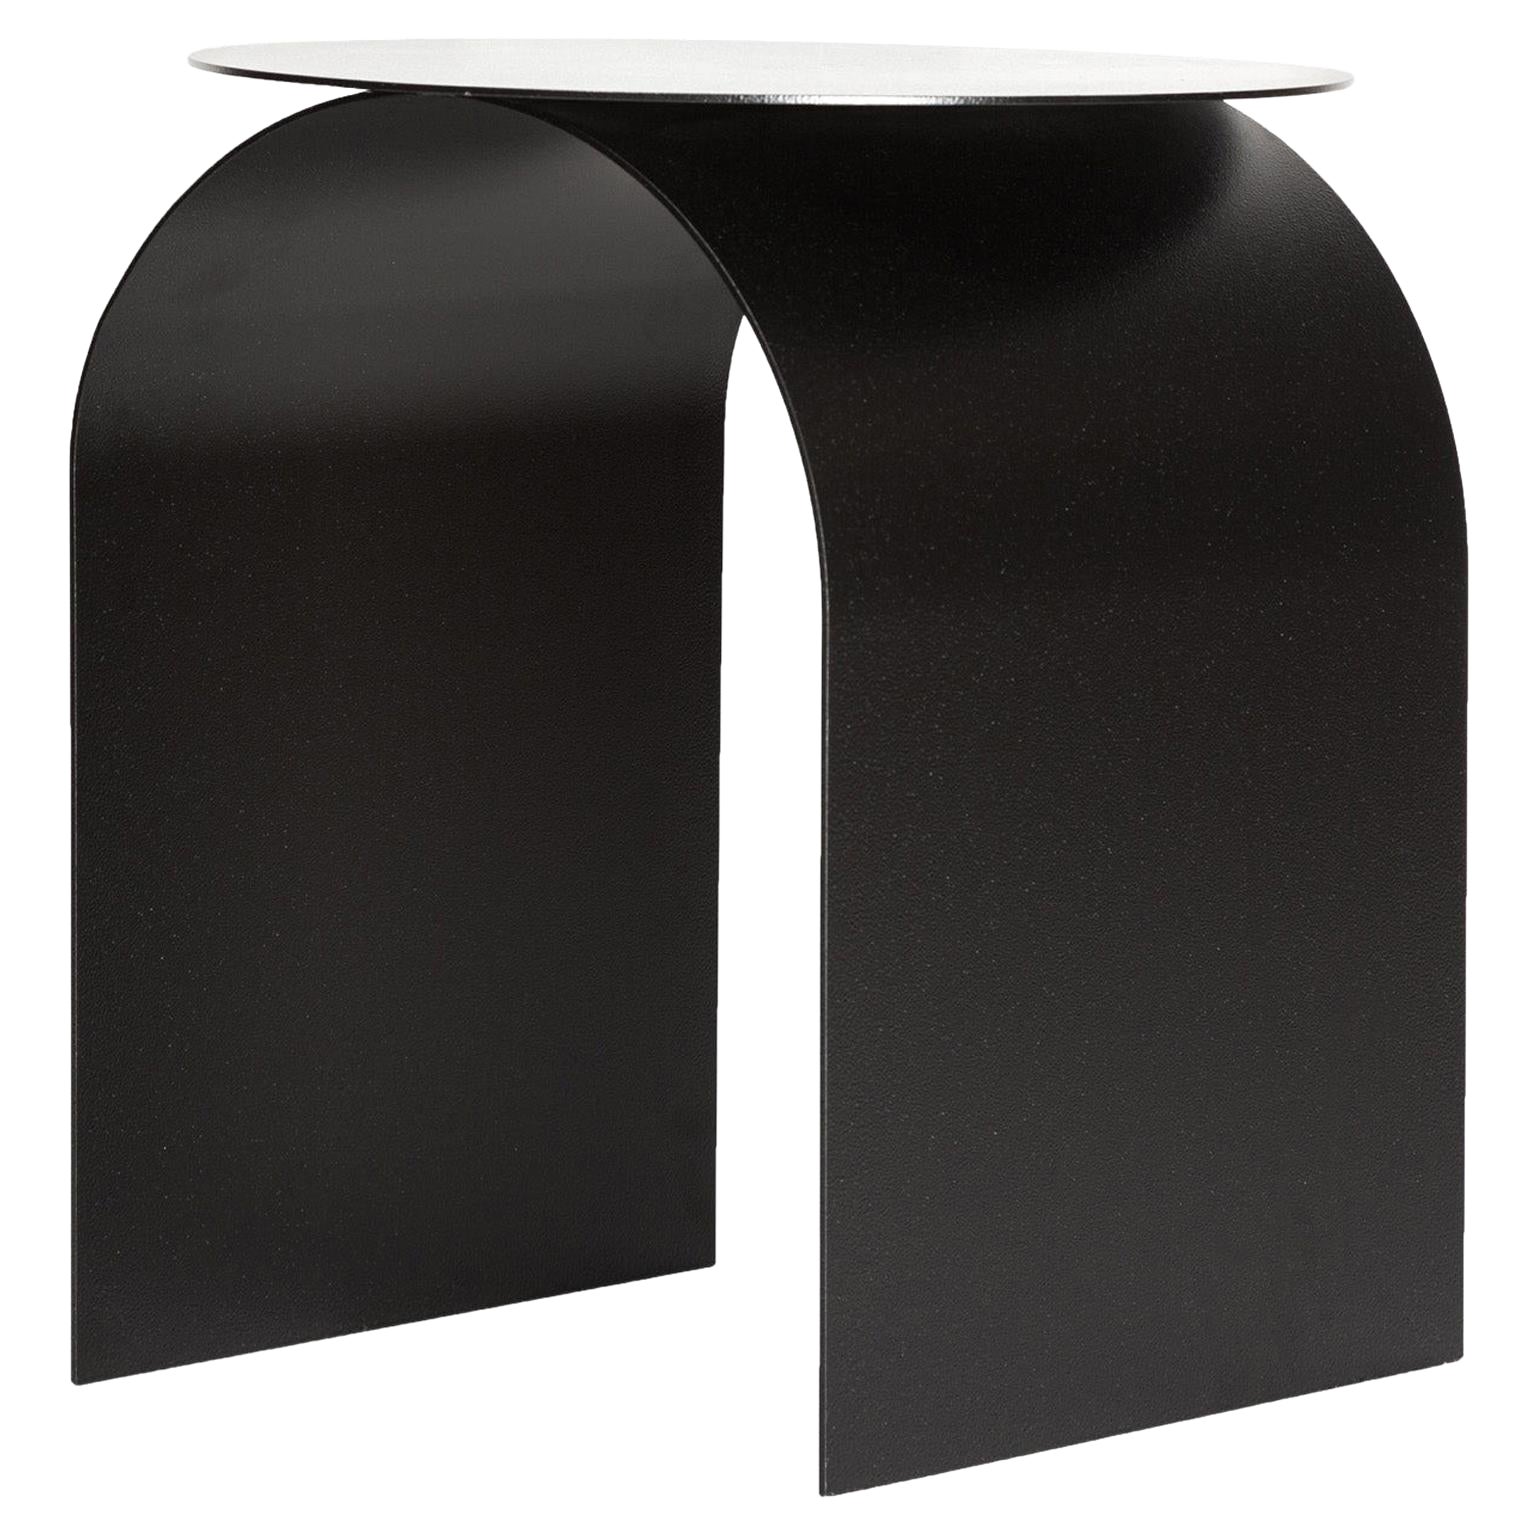 Sculptural Side Table - Decorative Stool - Architectural Stool

Designed by Milanese atelier Spinzi, Palladium celebrates the timeless aestethics of 16th century architect Andrea Palladio. The elegance of his round arches is shaped in air-thin metal